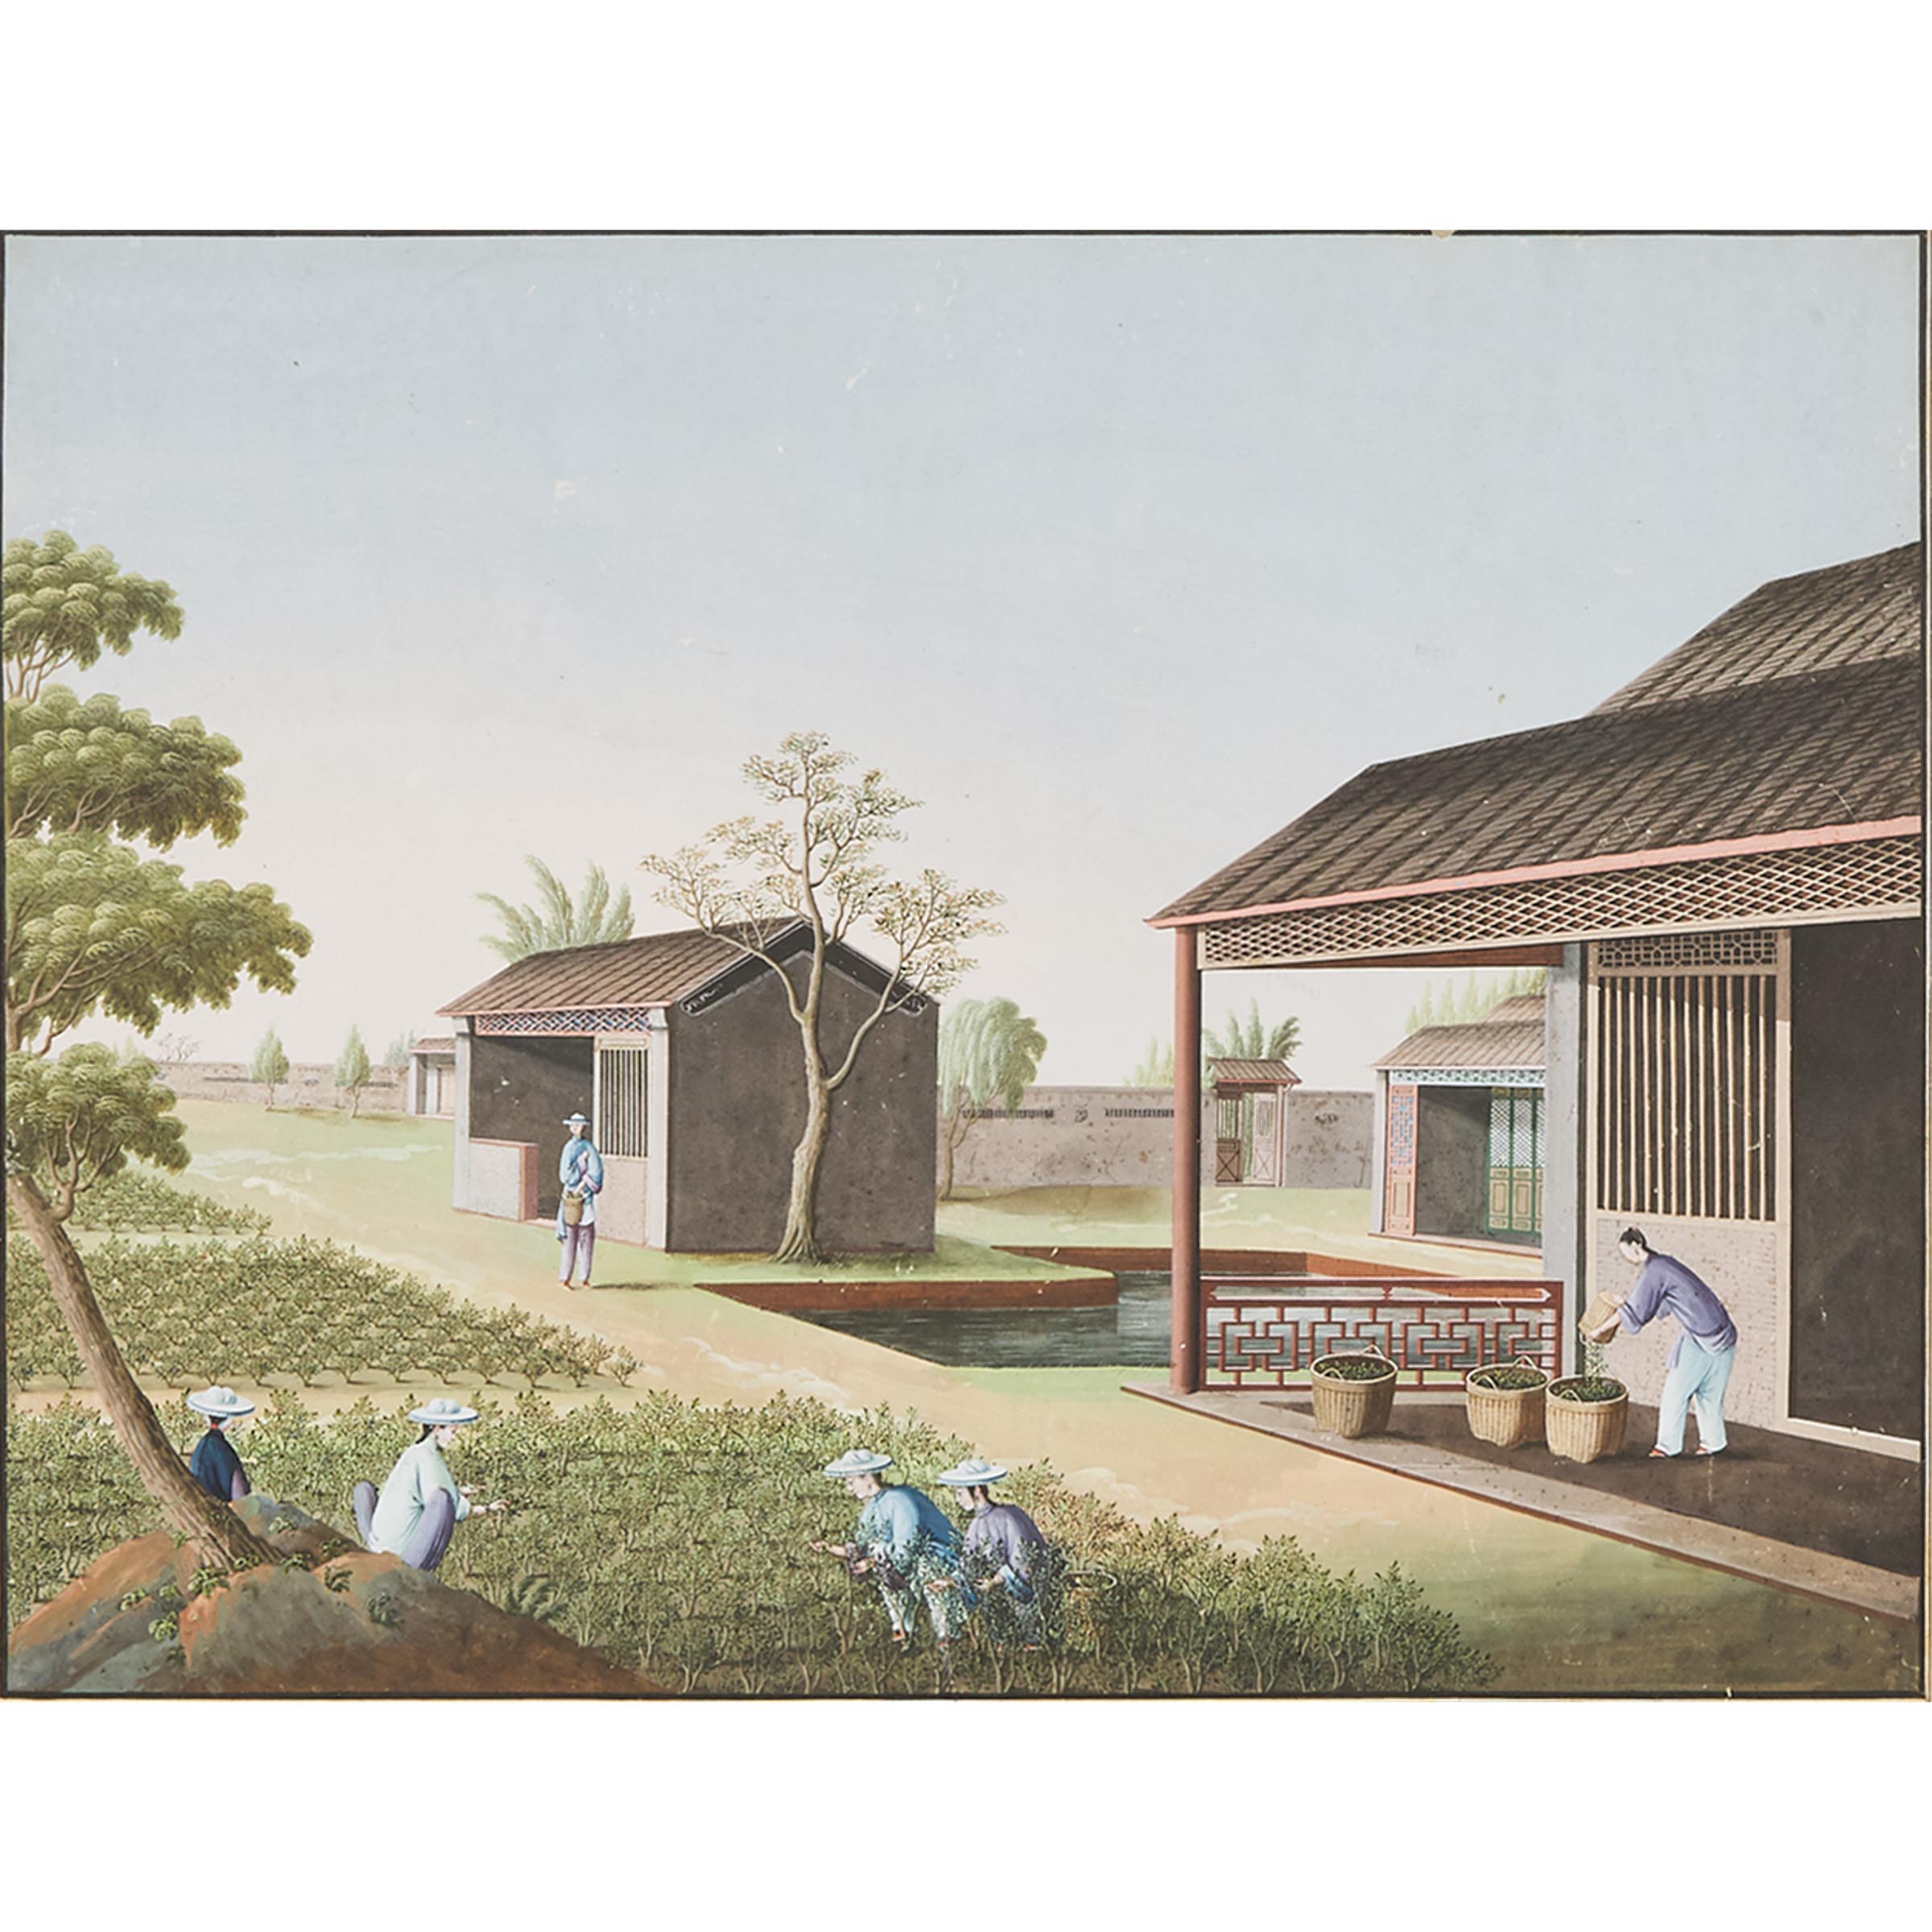 Canton School, A Group of Four Chinese Export 'Tea Cultivation' Paintings, Early 19th Century